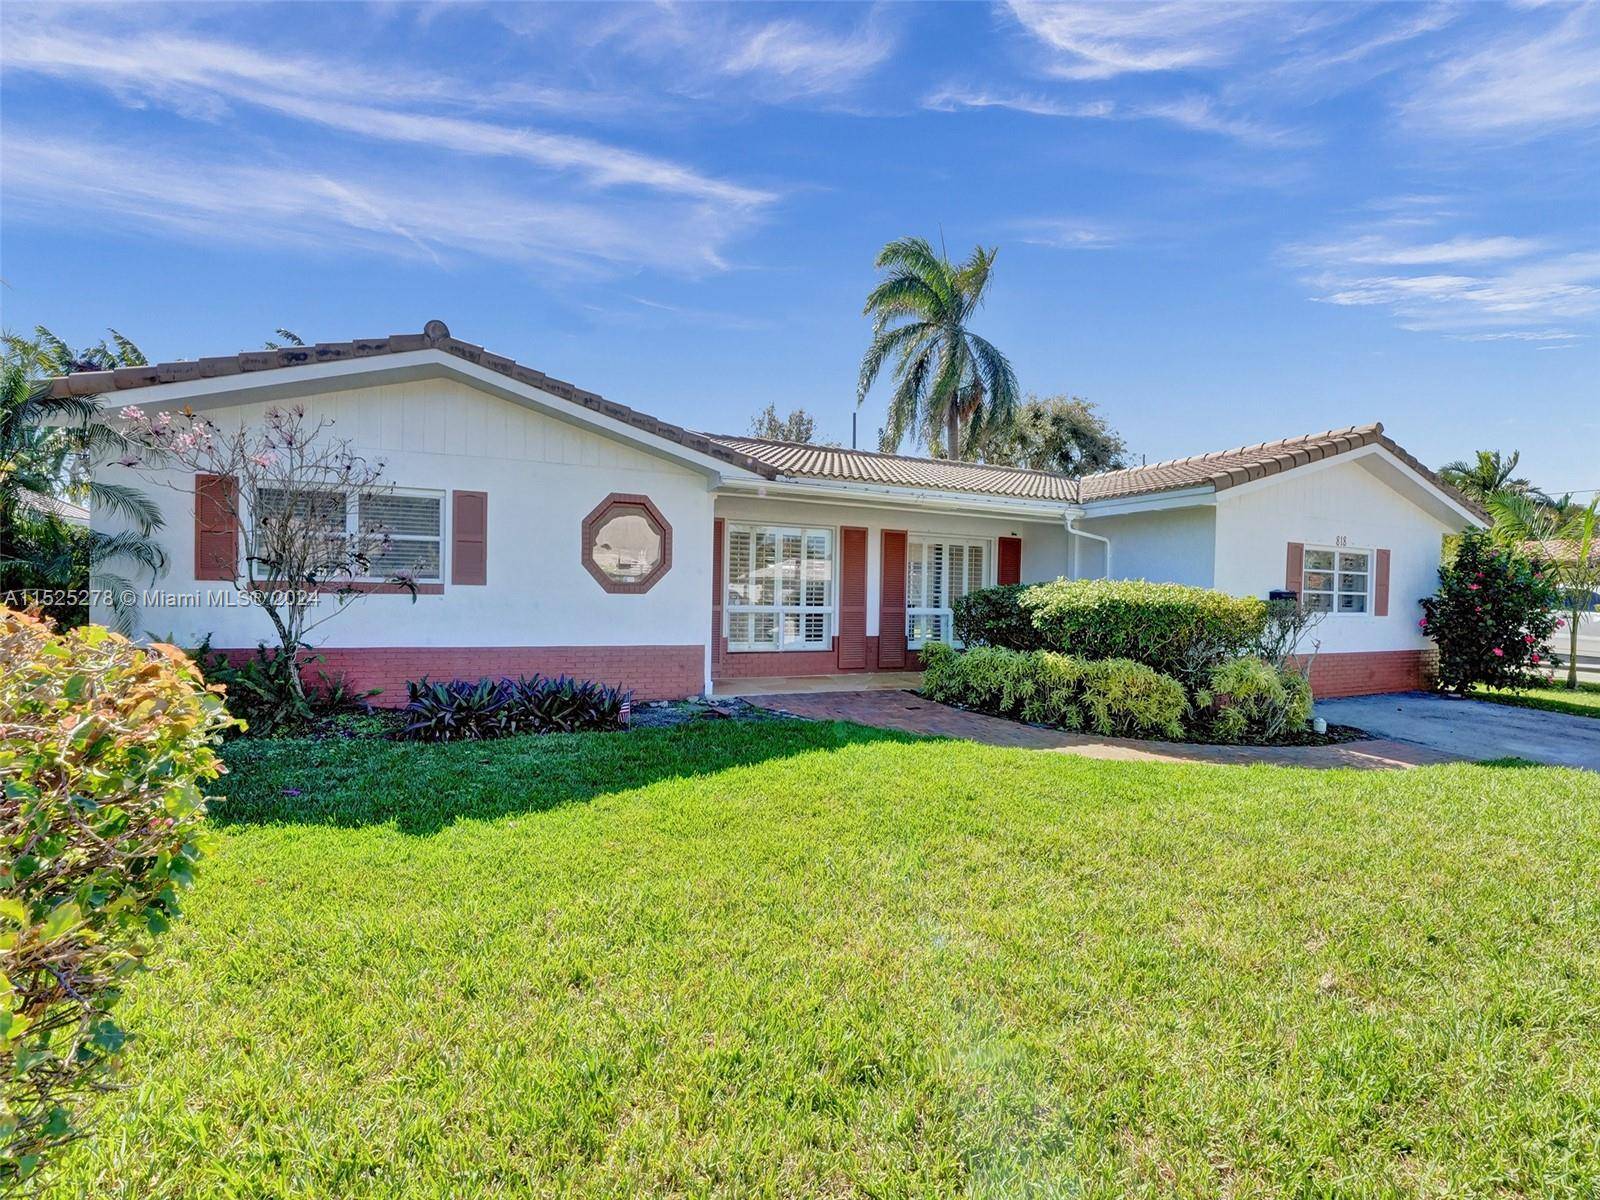 Immerse yourself in the luxury of Boca Raton with this exquisite 3 bedroom, 3 bathroom home, boasting a private screened pool set in a huge backyard perfect for family gatherings.